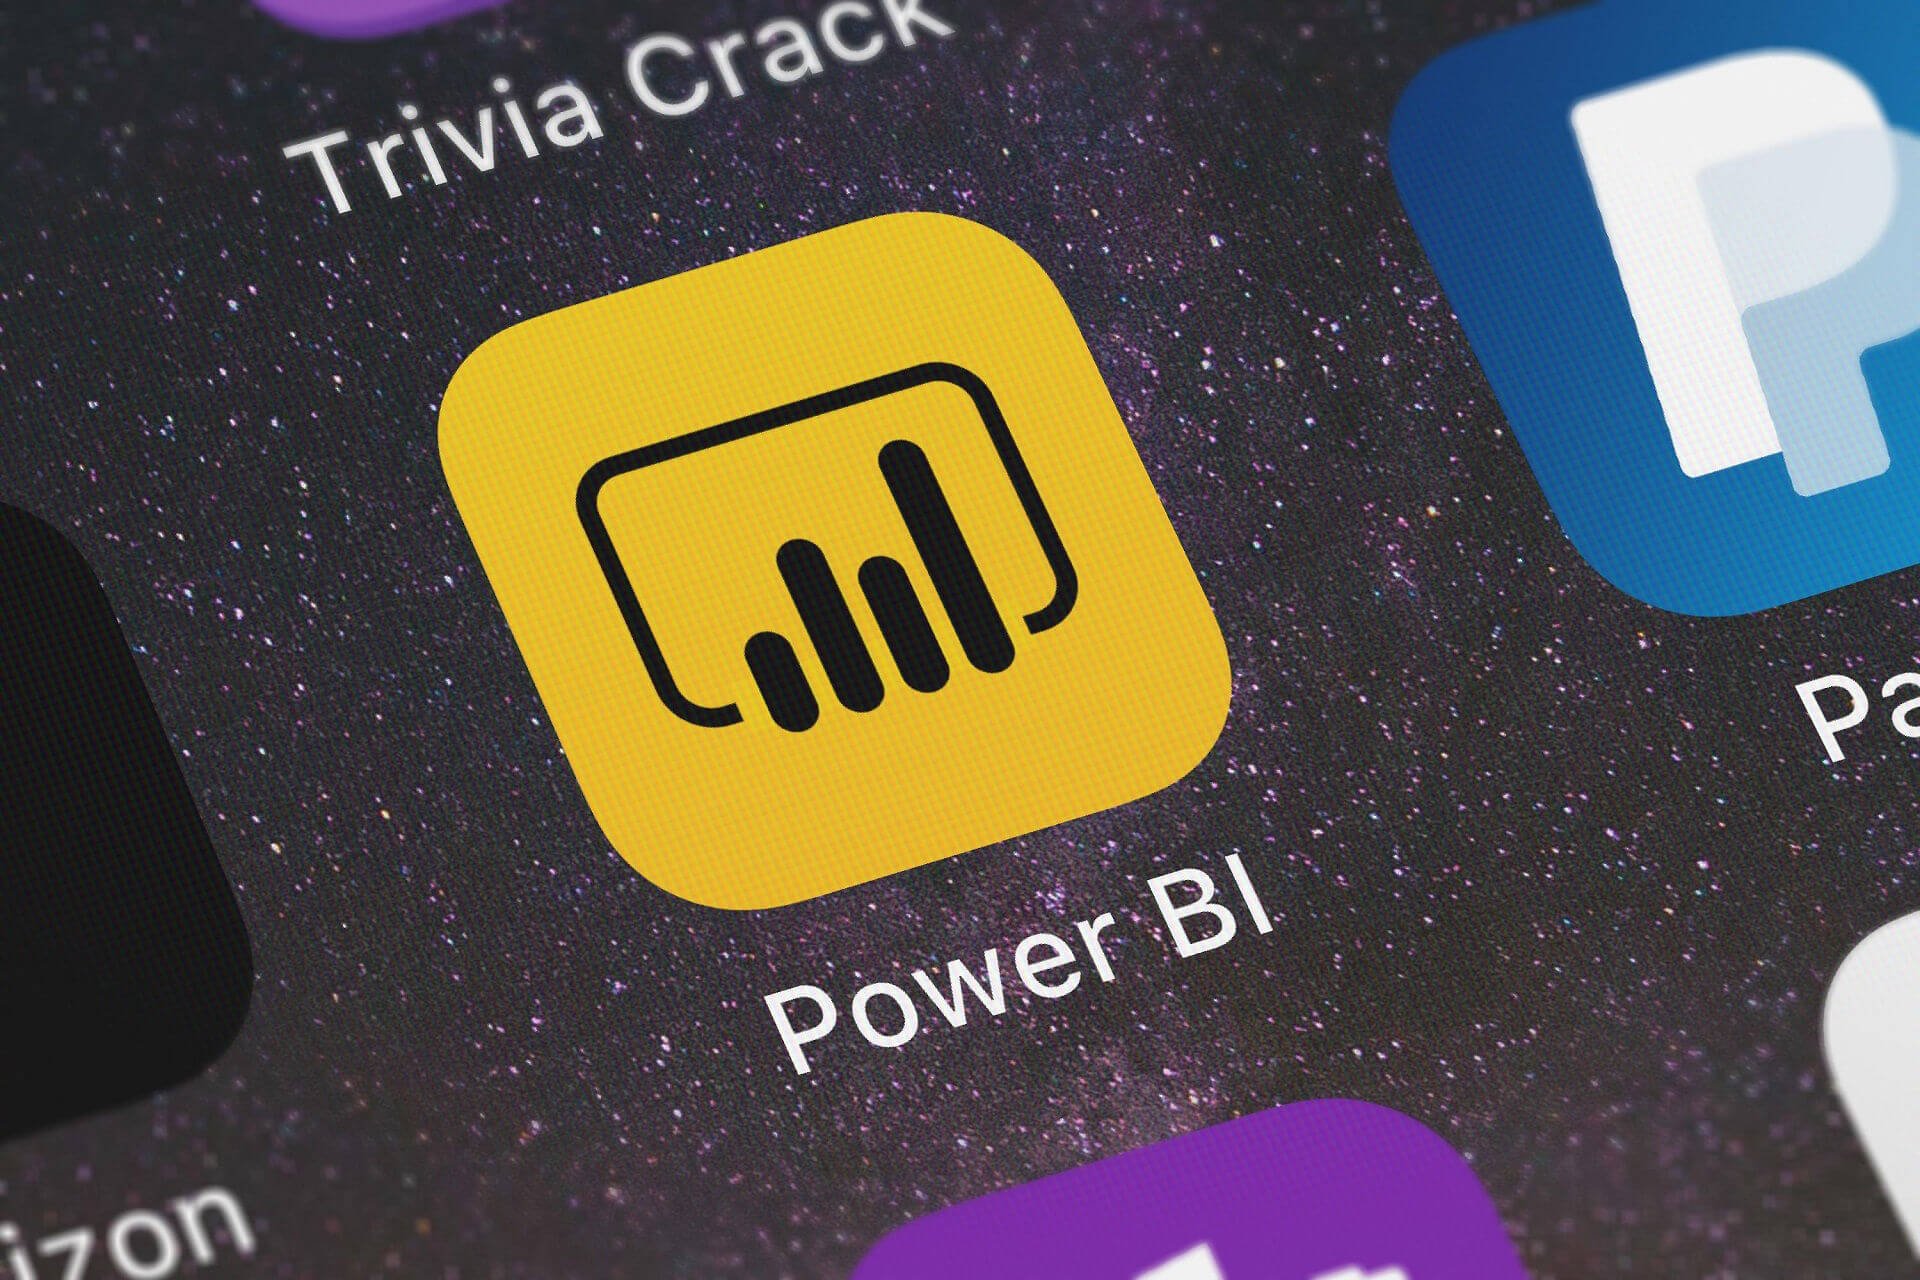 Power BI June update brings new UI and AI assisted graphics